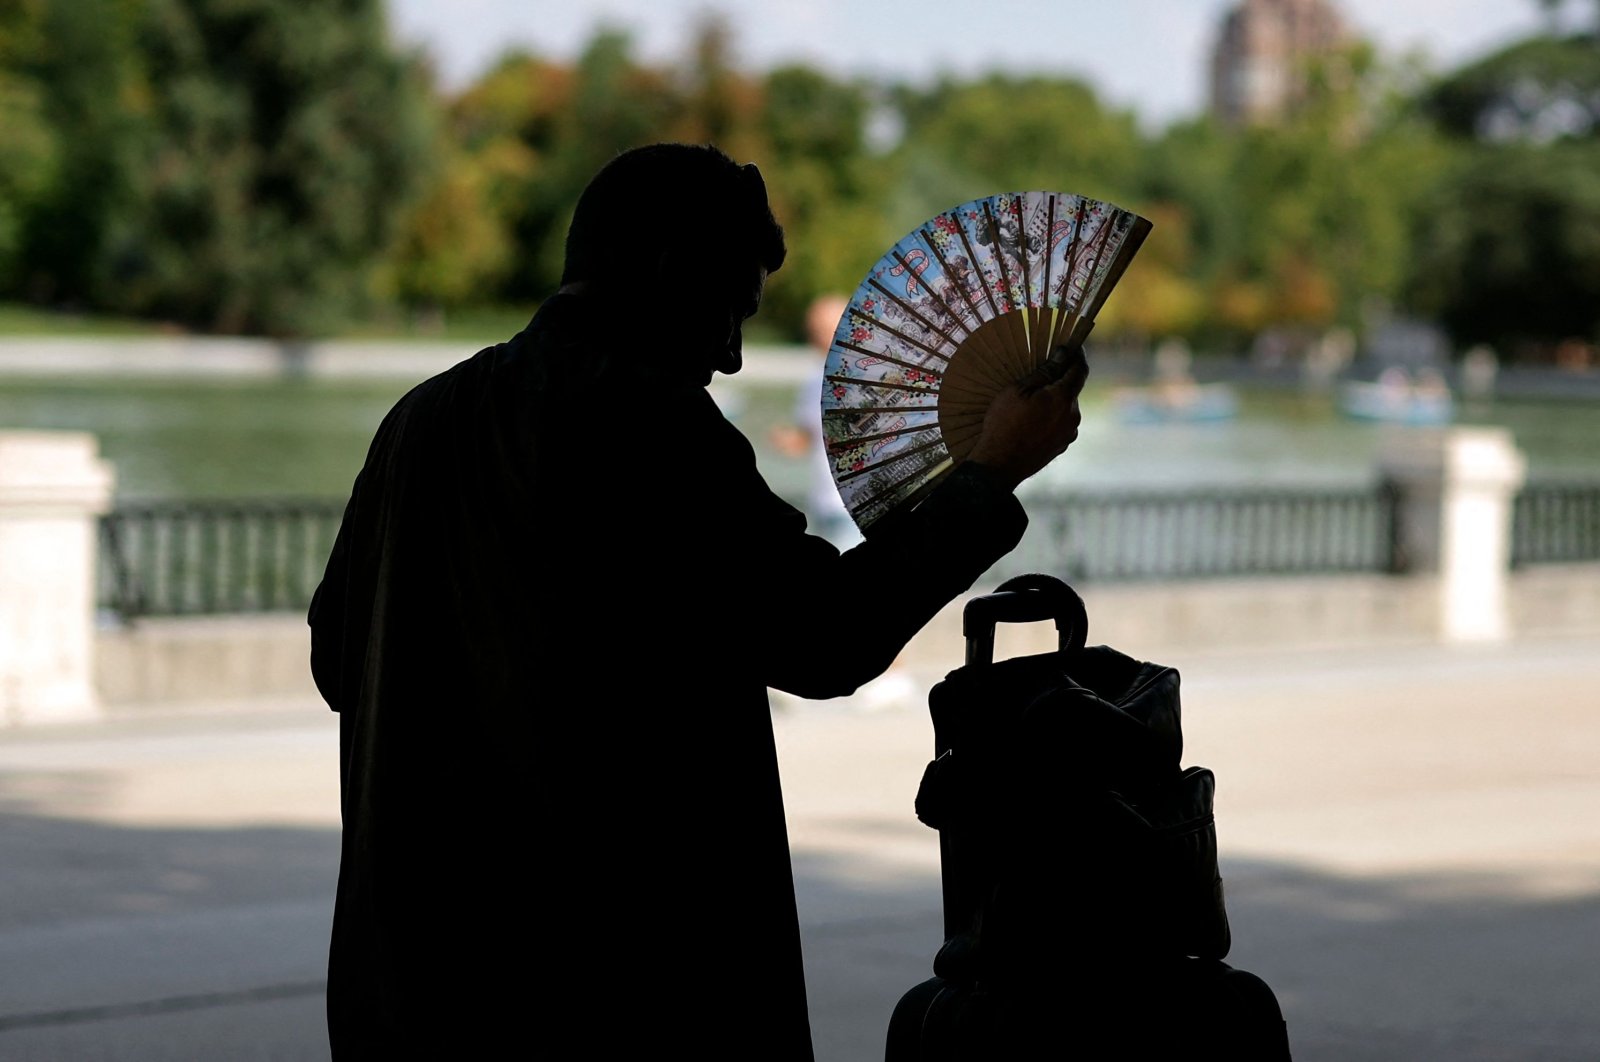 A man uses a hand fan in a park in central Madrid during a heatwave, Spain, Aug. 2, 2022. (AFP Photo)